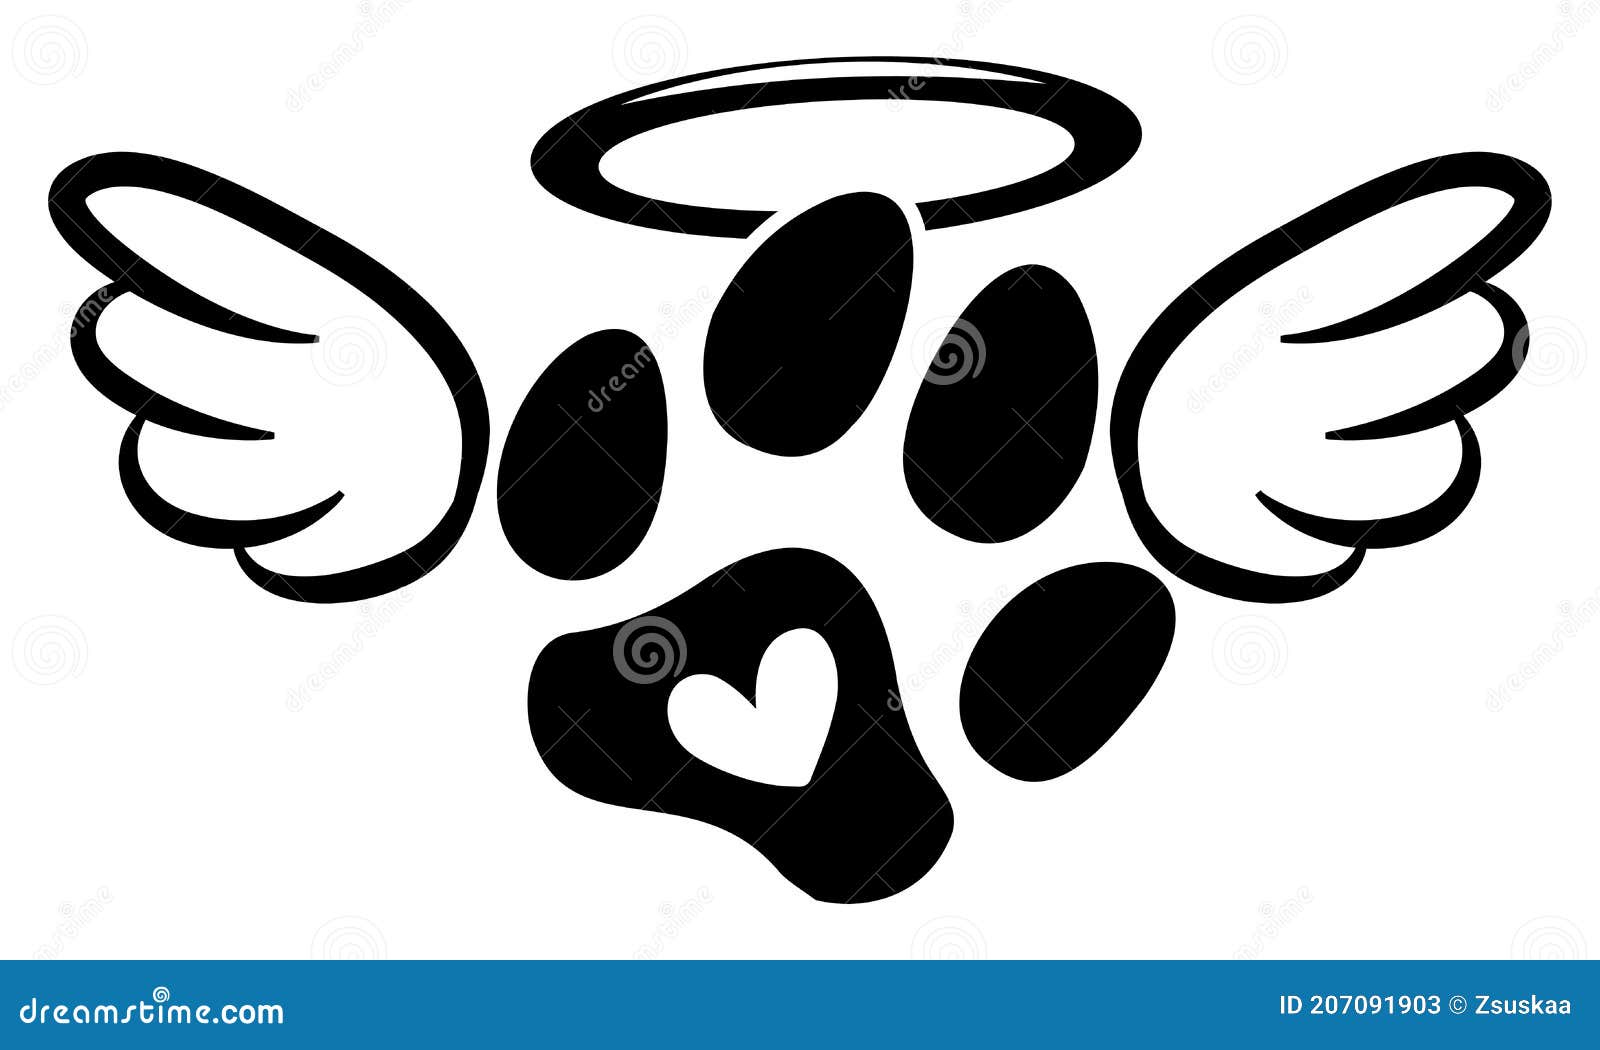 dog or cat footprint angel with wings, gloria, bone and footprints, paws.